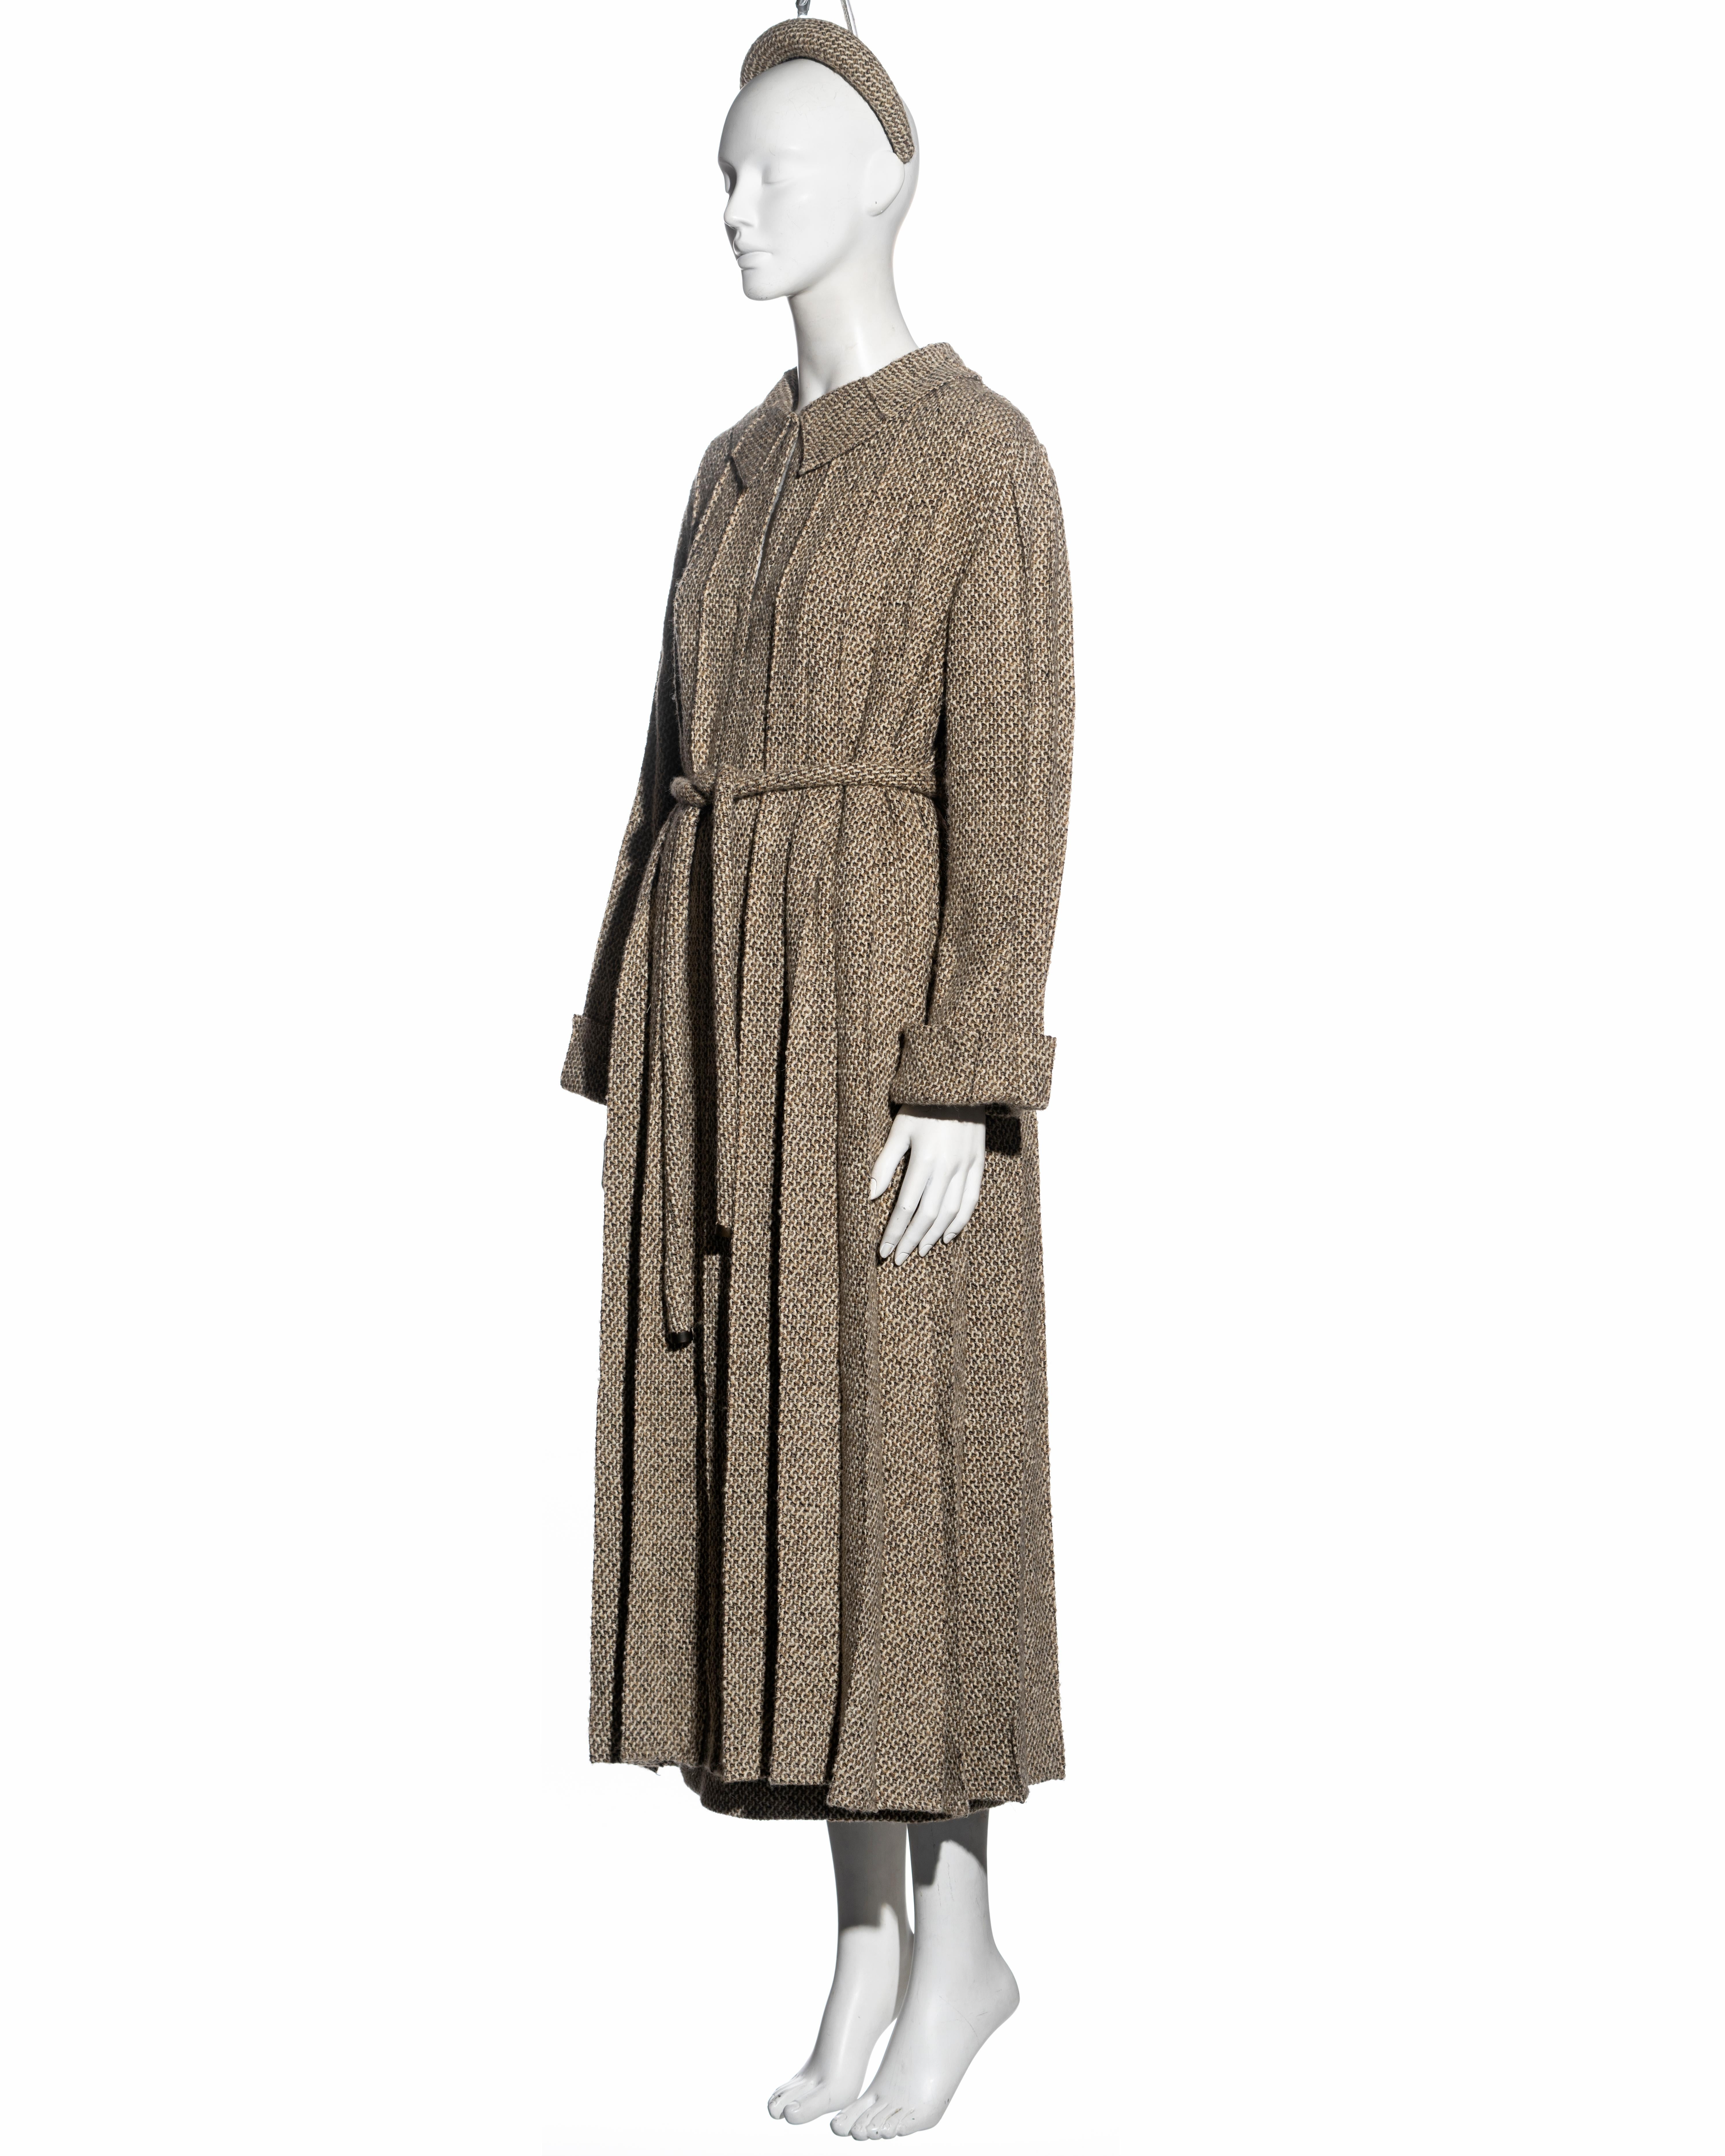 Chanel by Karl Lagerfeld brown tweed pleated coat, skirt and hat set, fw 1998 For Sale 1